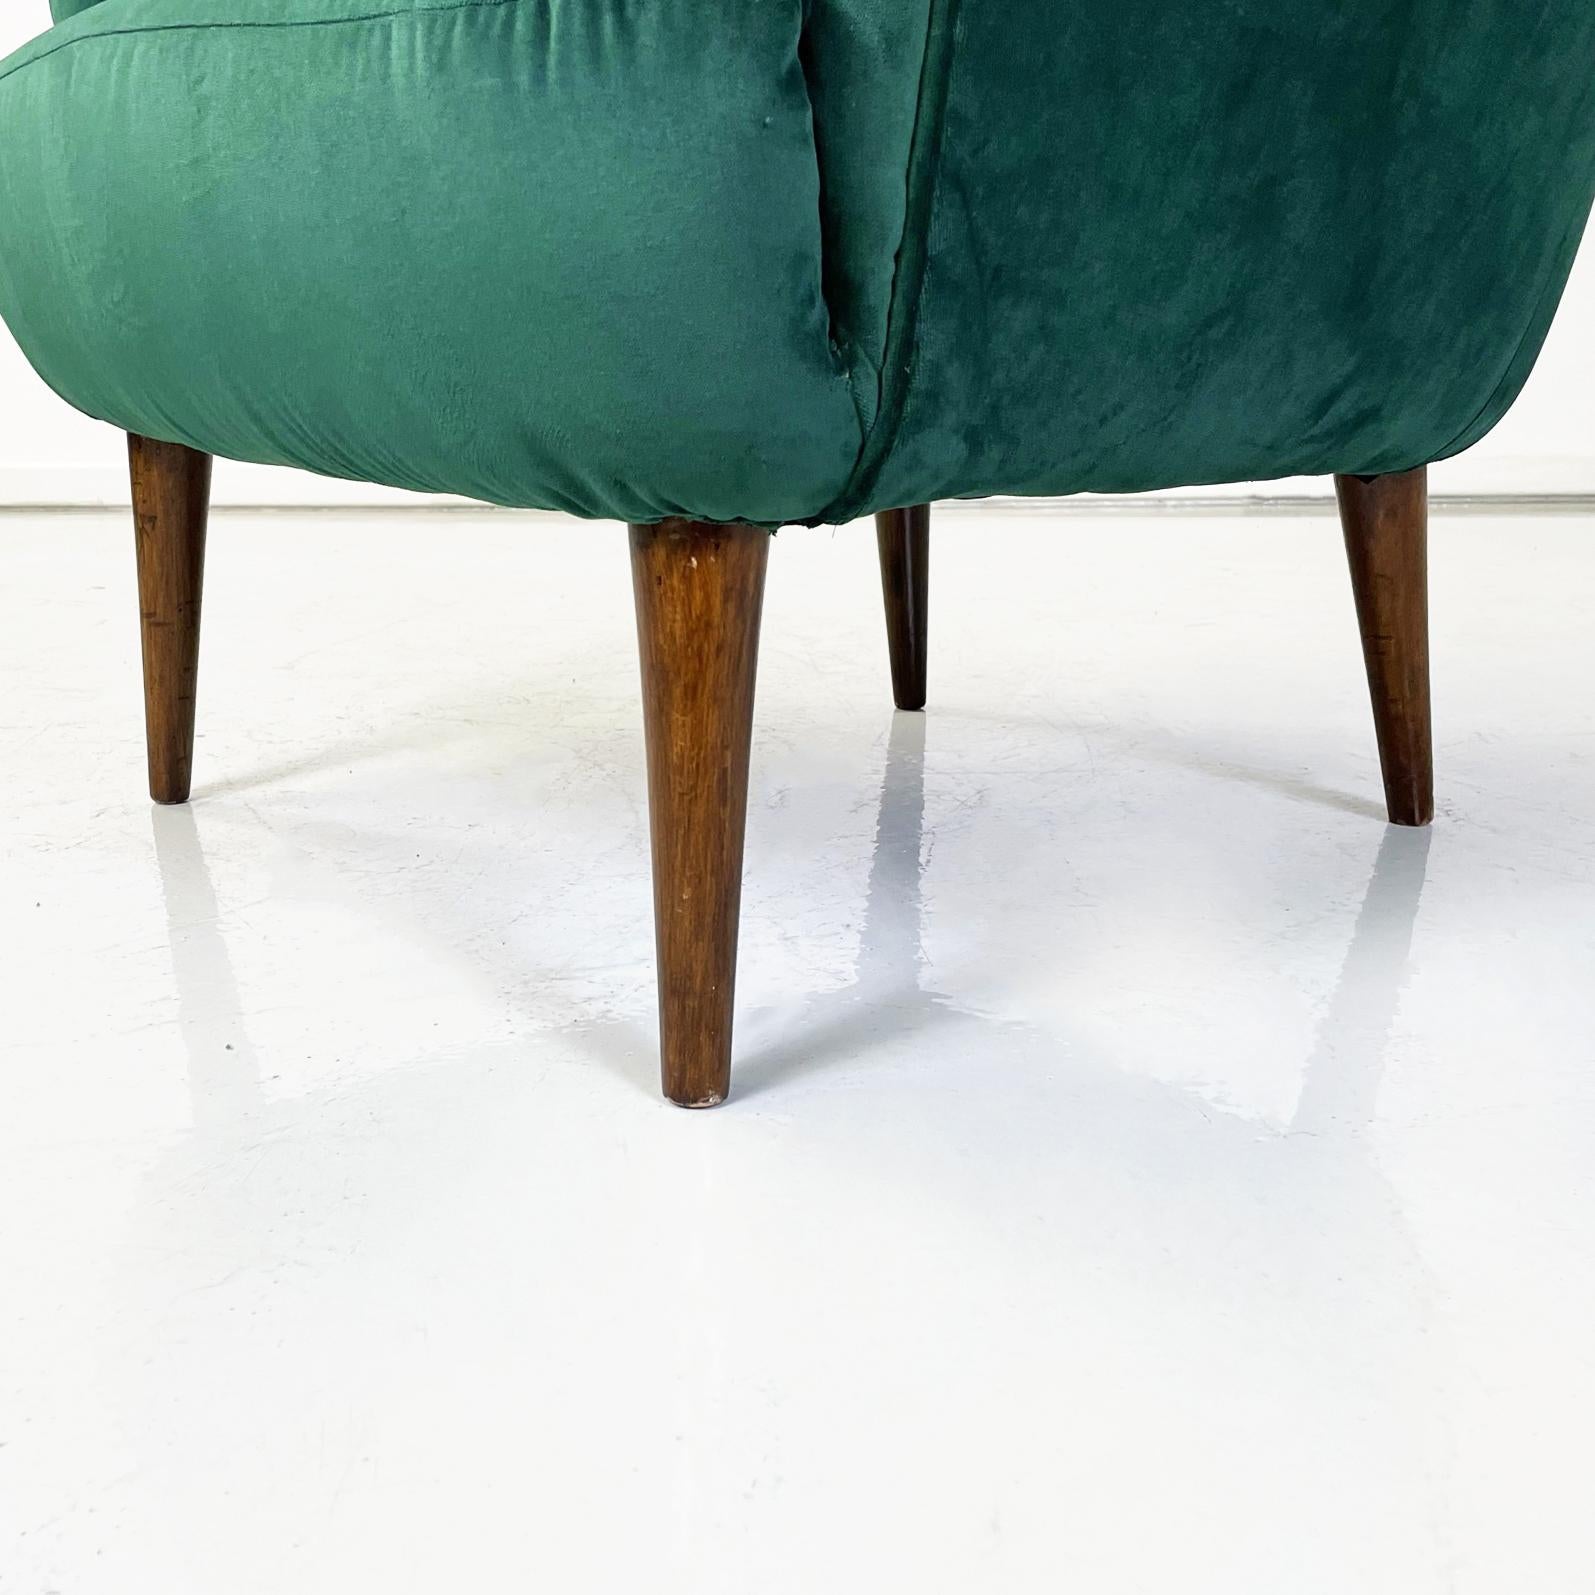 Italian Mid-Century Armchairs in Forest Green Velvet and Wooden Legs, 1950s For Sale 5